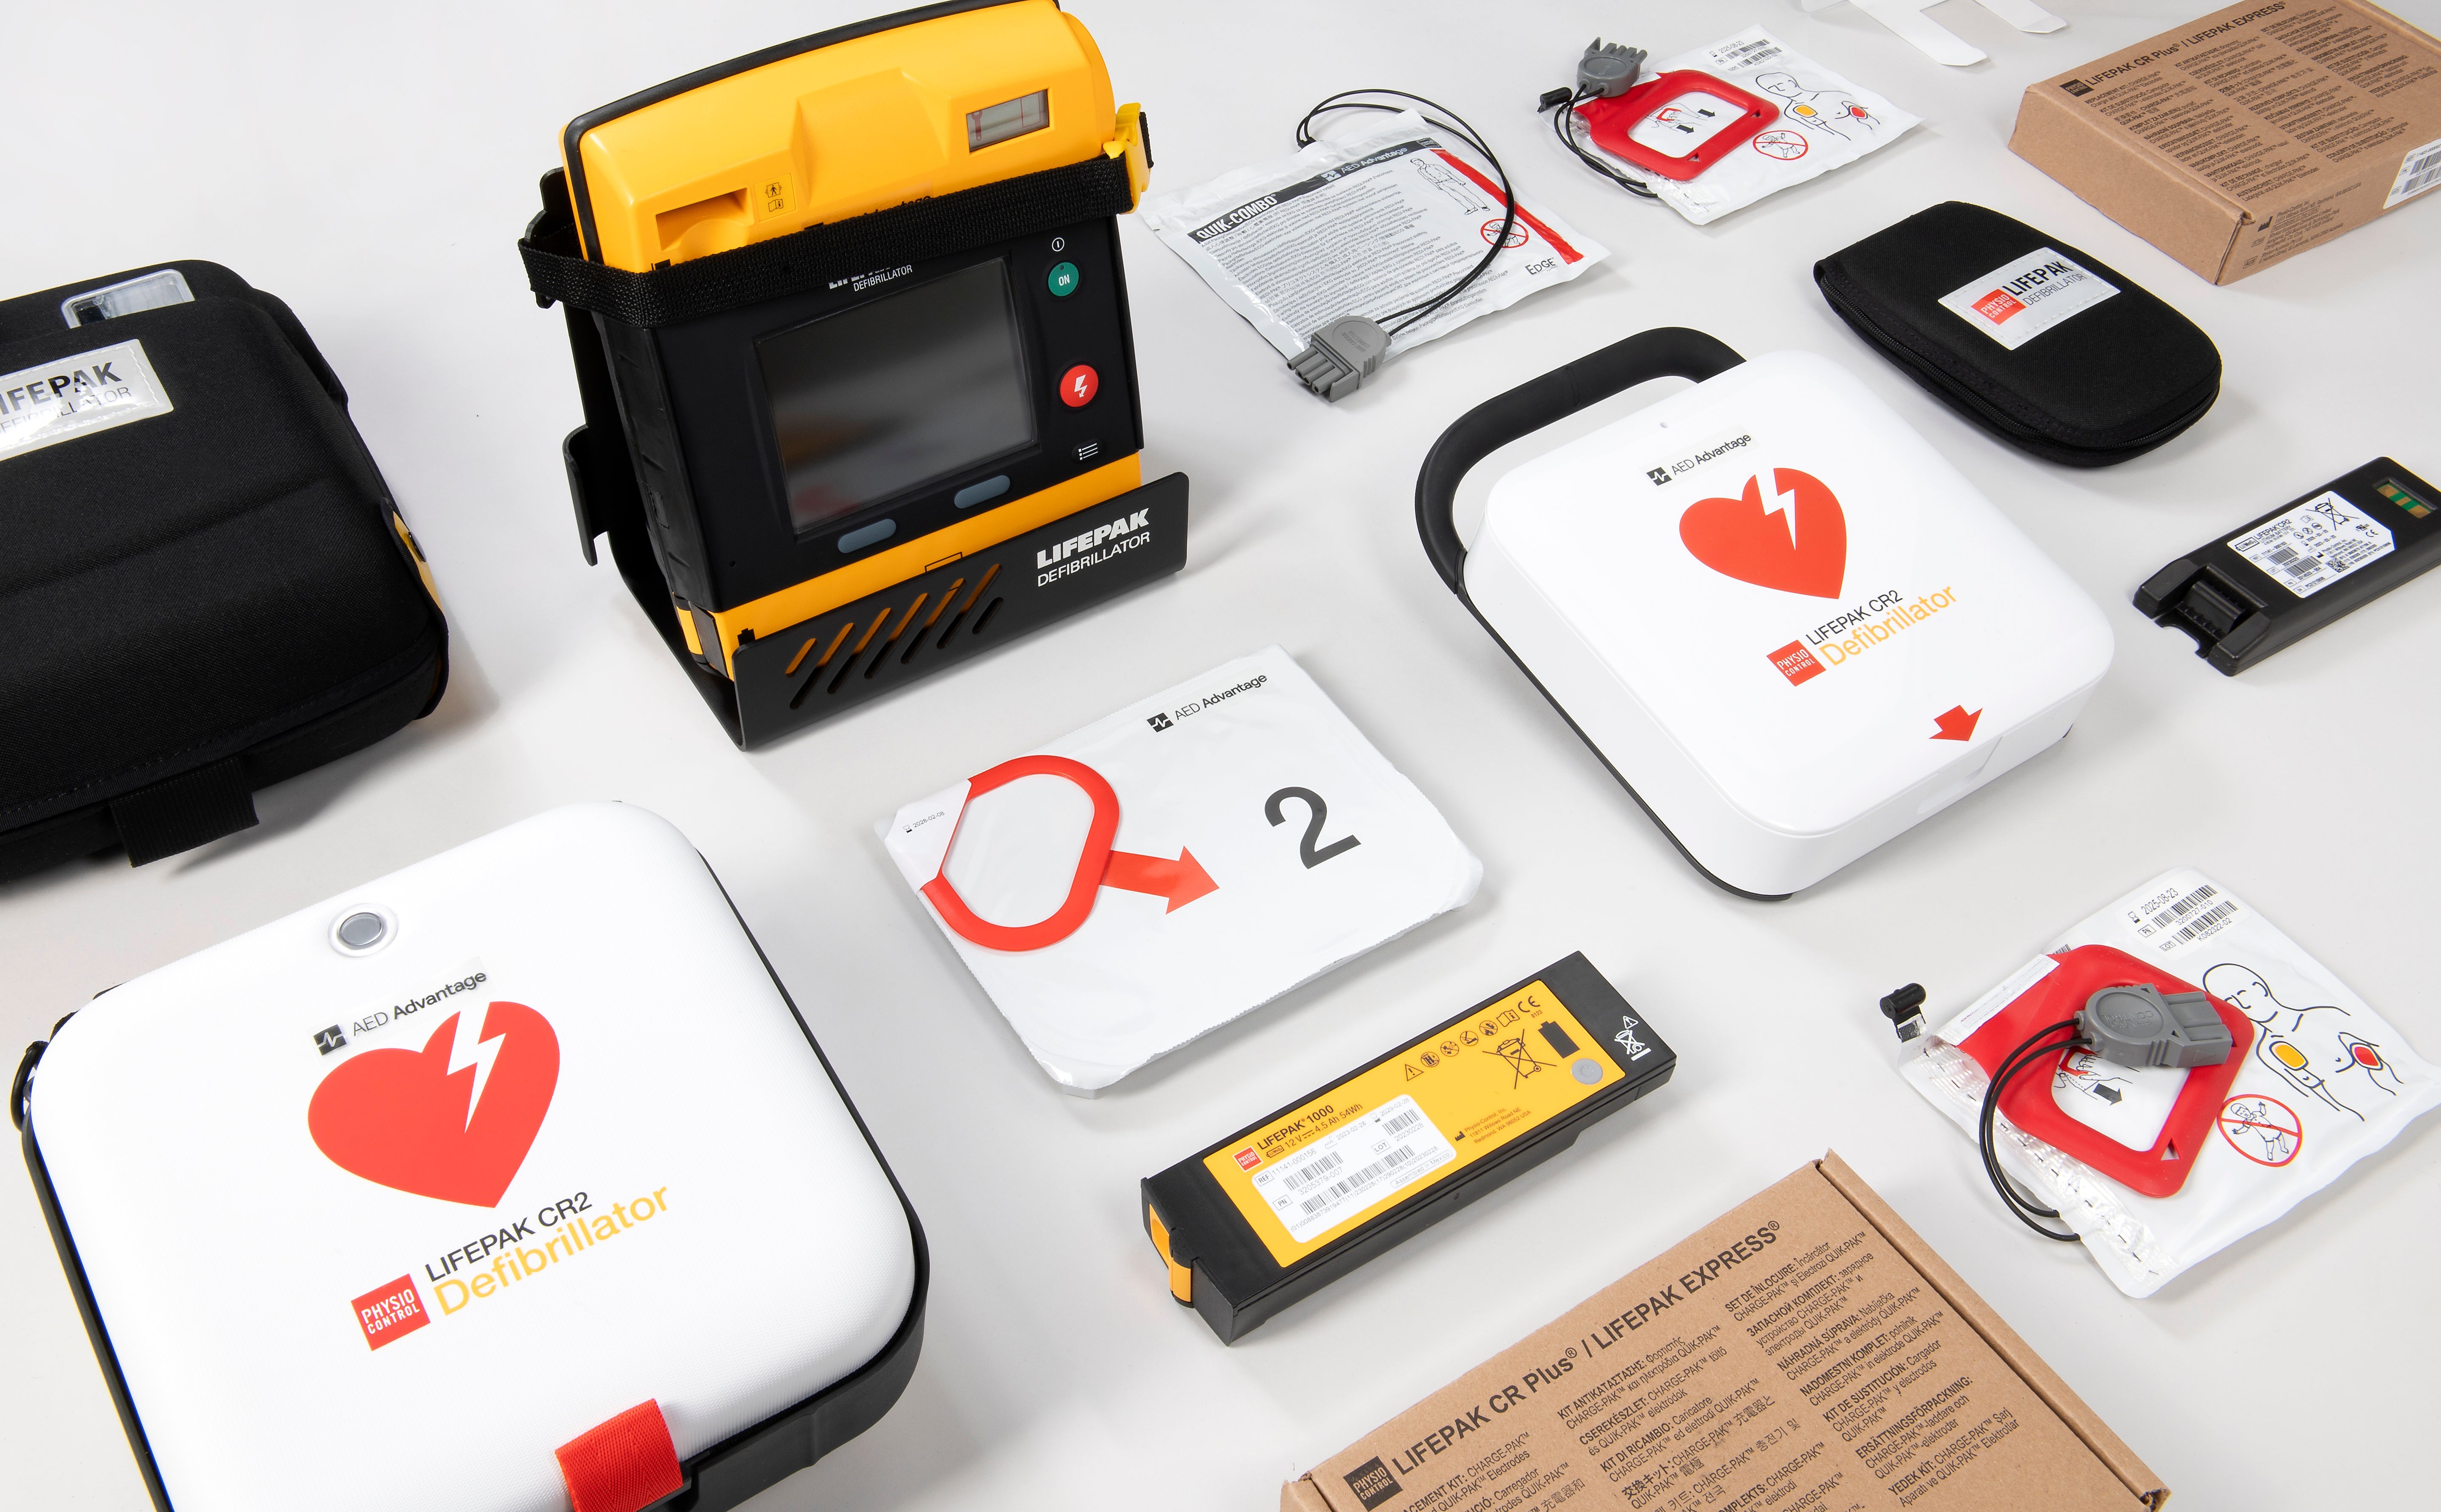 A collage of LIFEPAK AEDs and their accessories of various colors